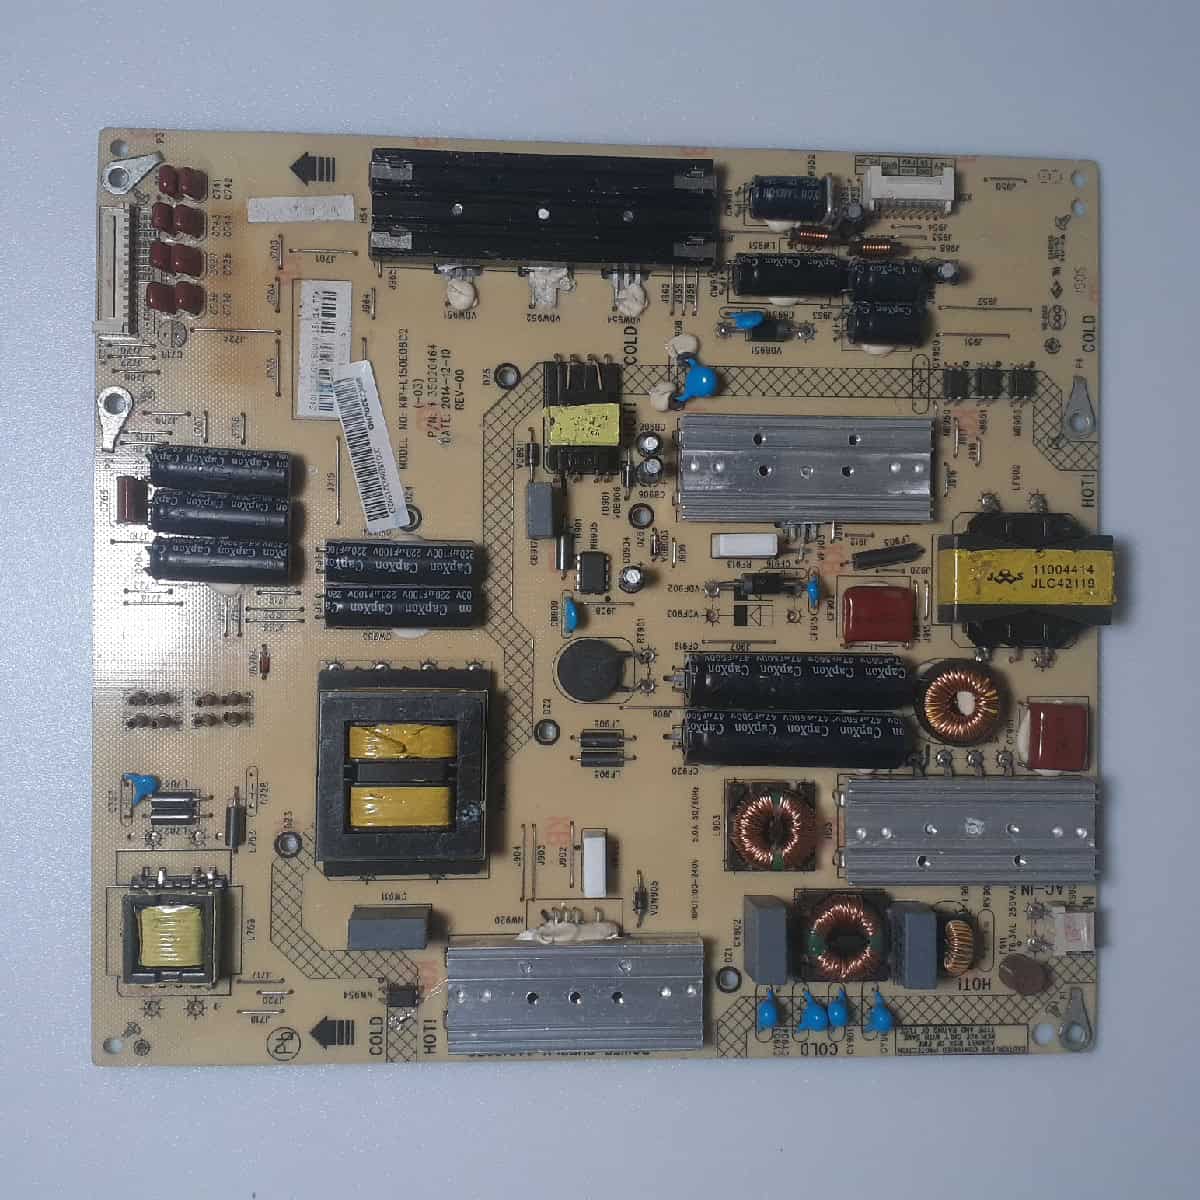 50K2330UHD MICROMAX POWER SUPPLY BOARD FOR LED TV